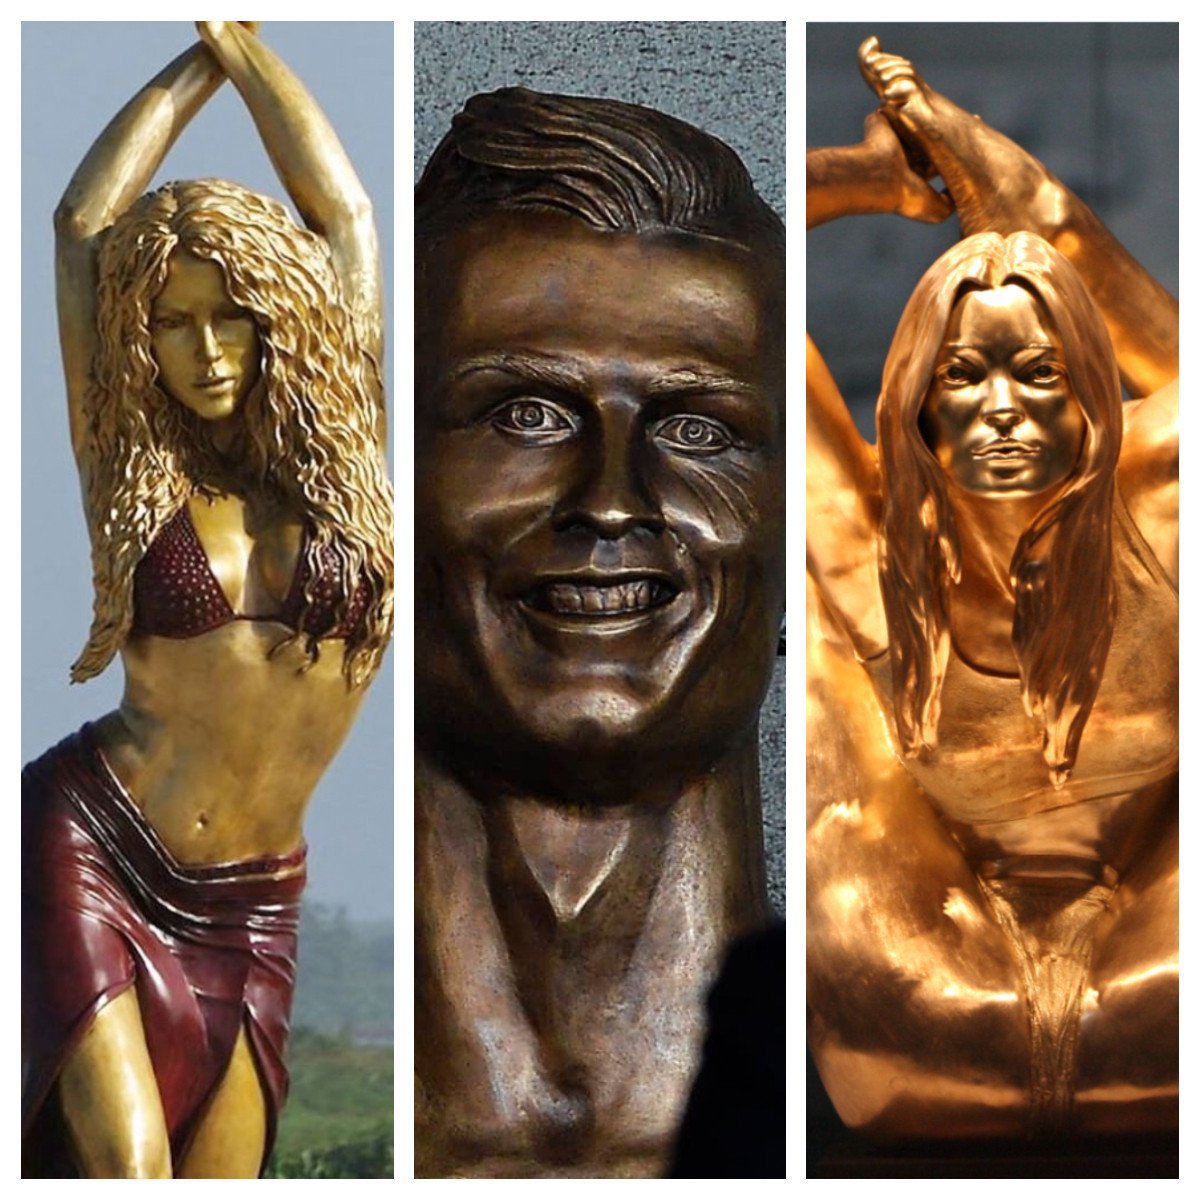 Shakira, Cristiano Ronaldo and Kate Moss have all had less than flattering sculptures made in their likeness. Photos: @alexandersocher, @visubal/Instagram; AFP